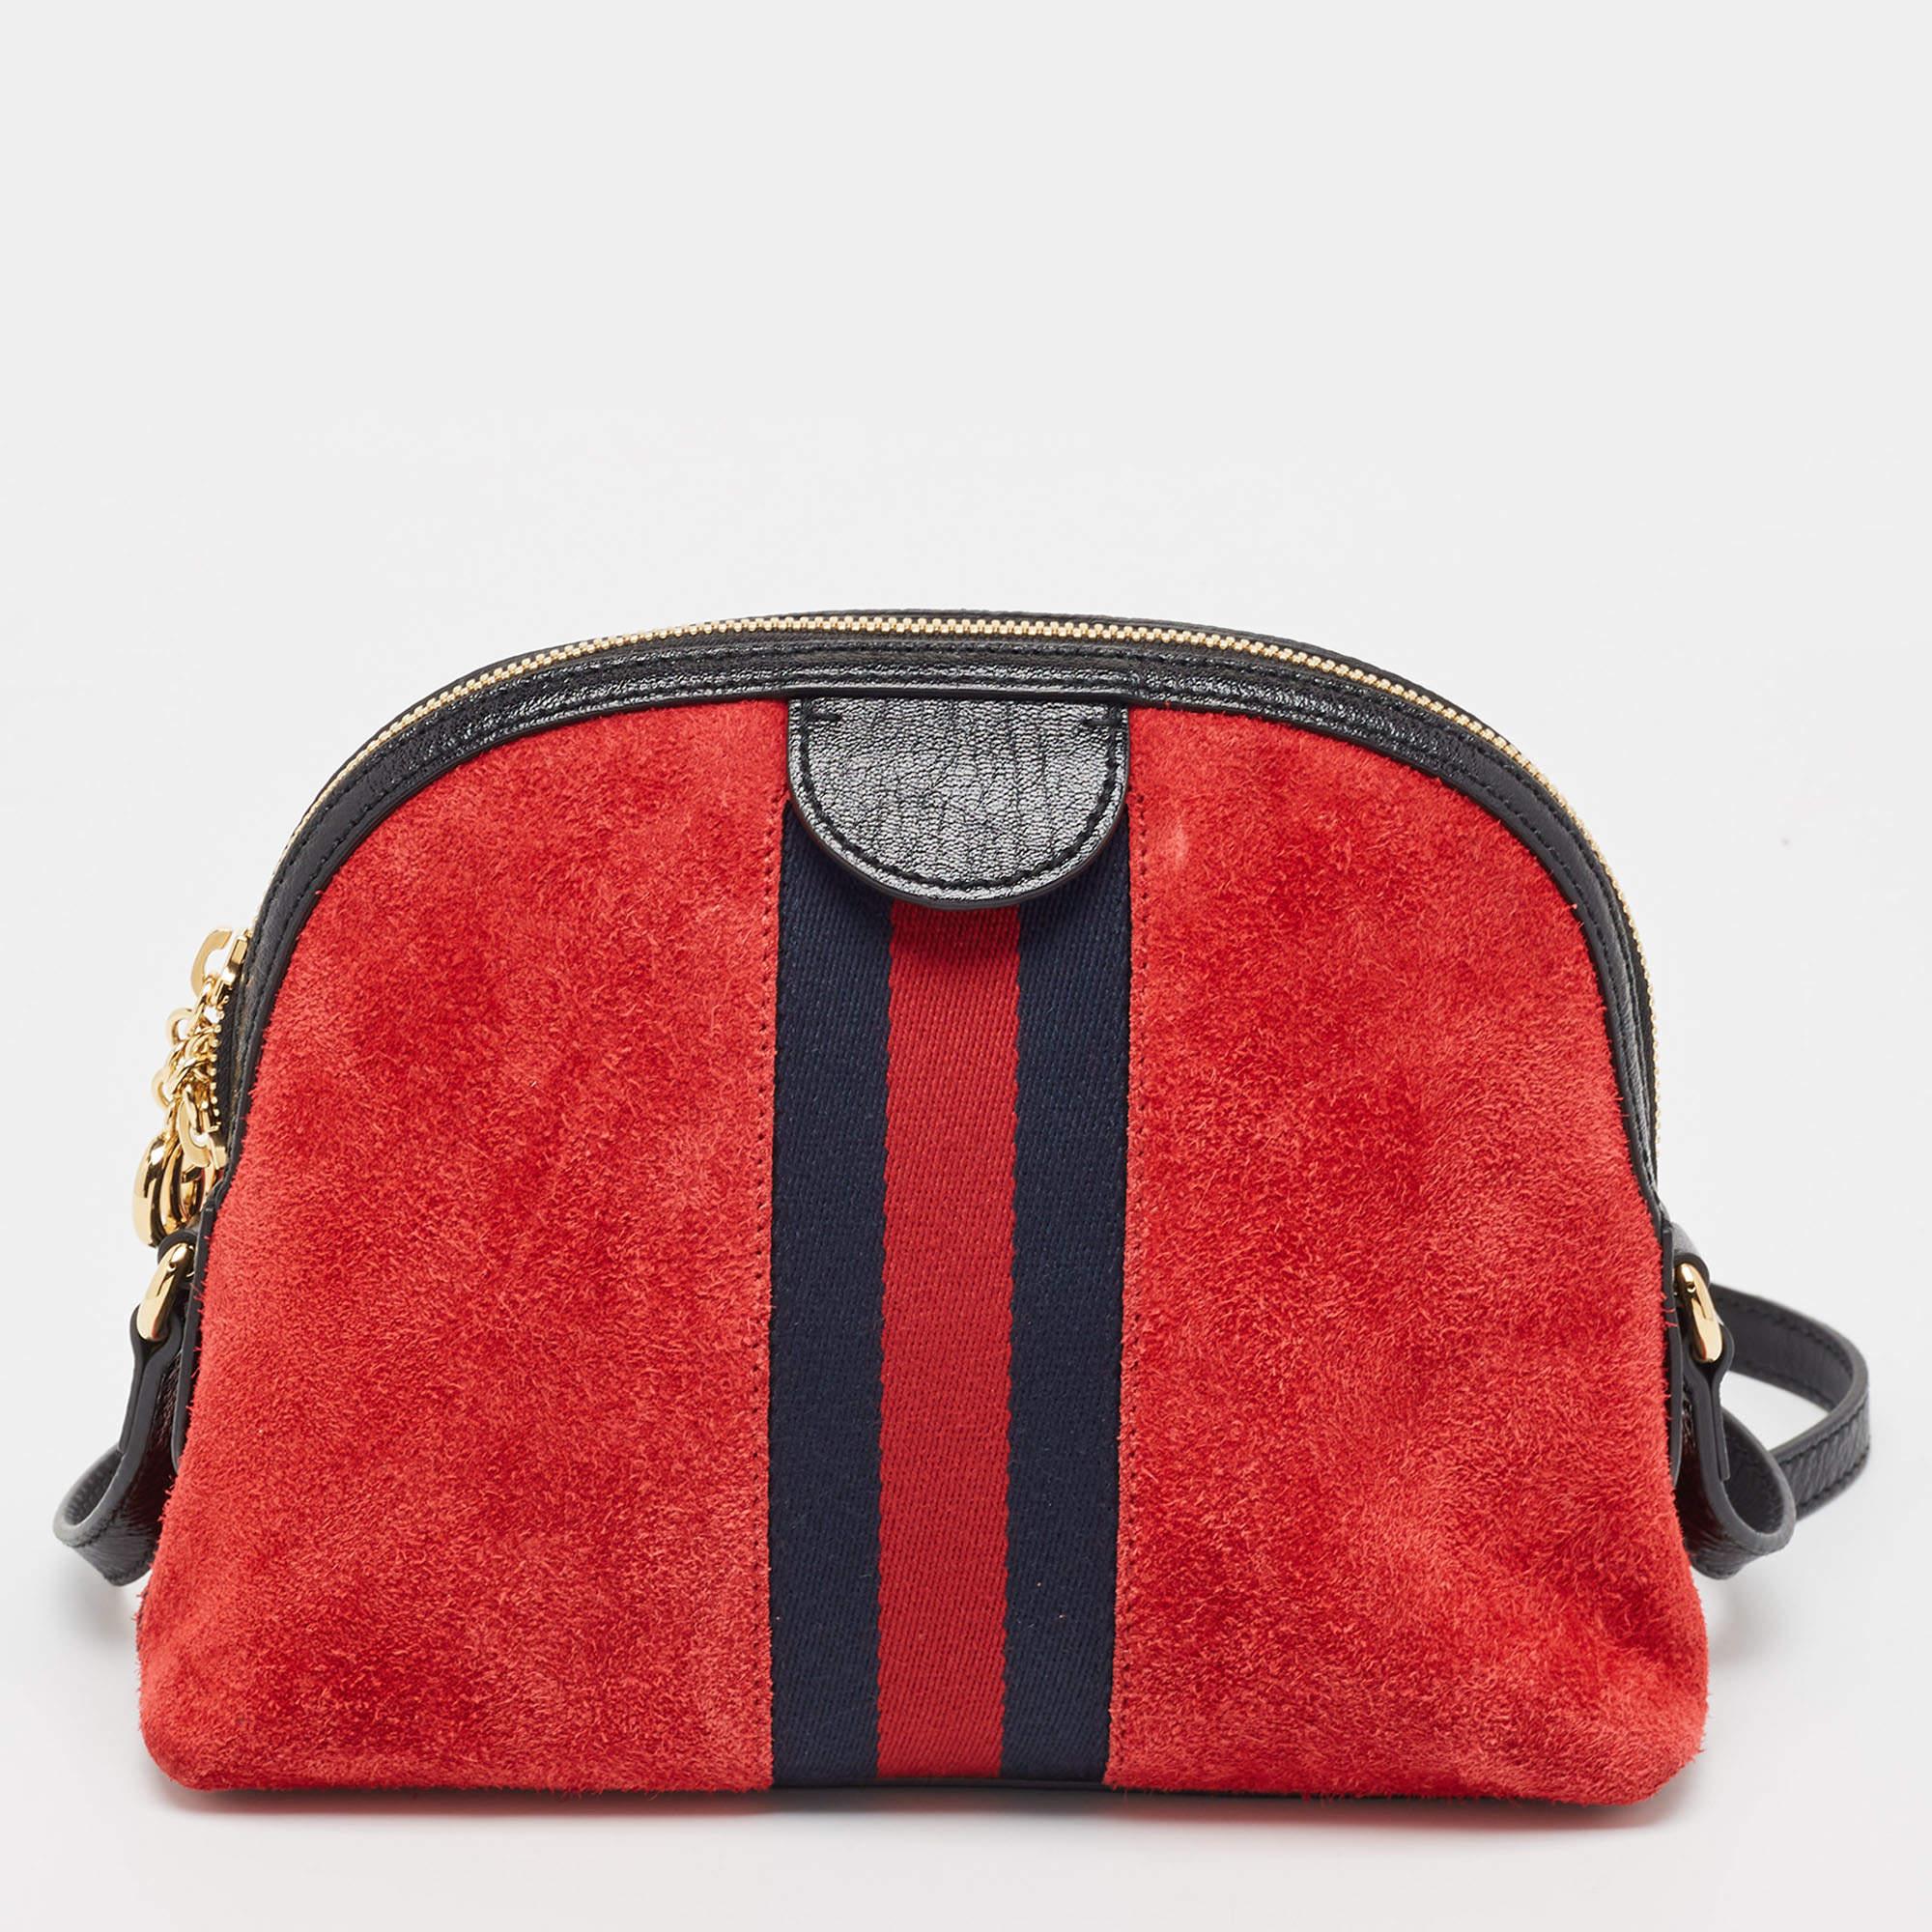 Gucci Red/Black Suede Small Web GG Ophidia Shoulder Bag 7